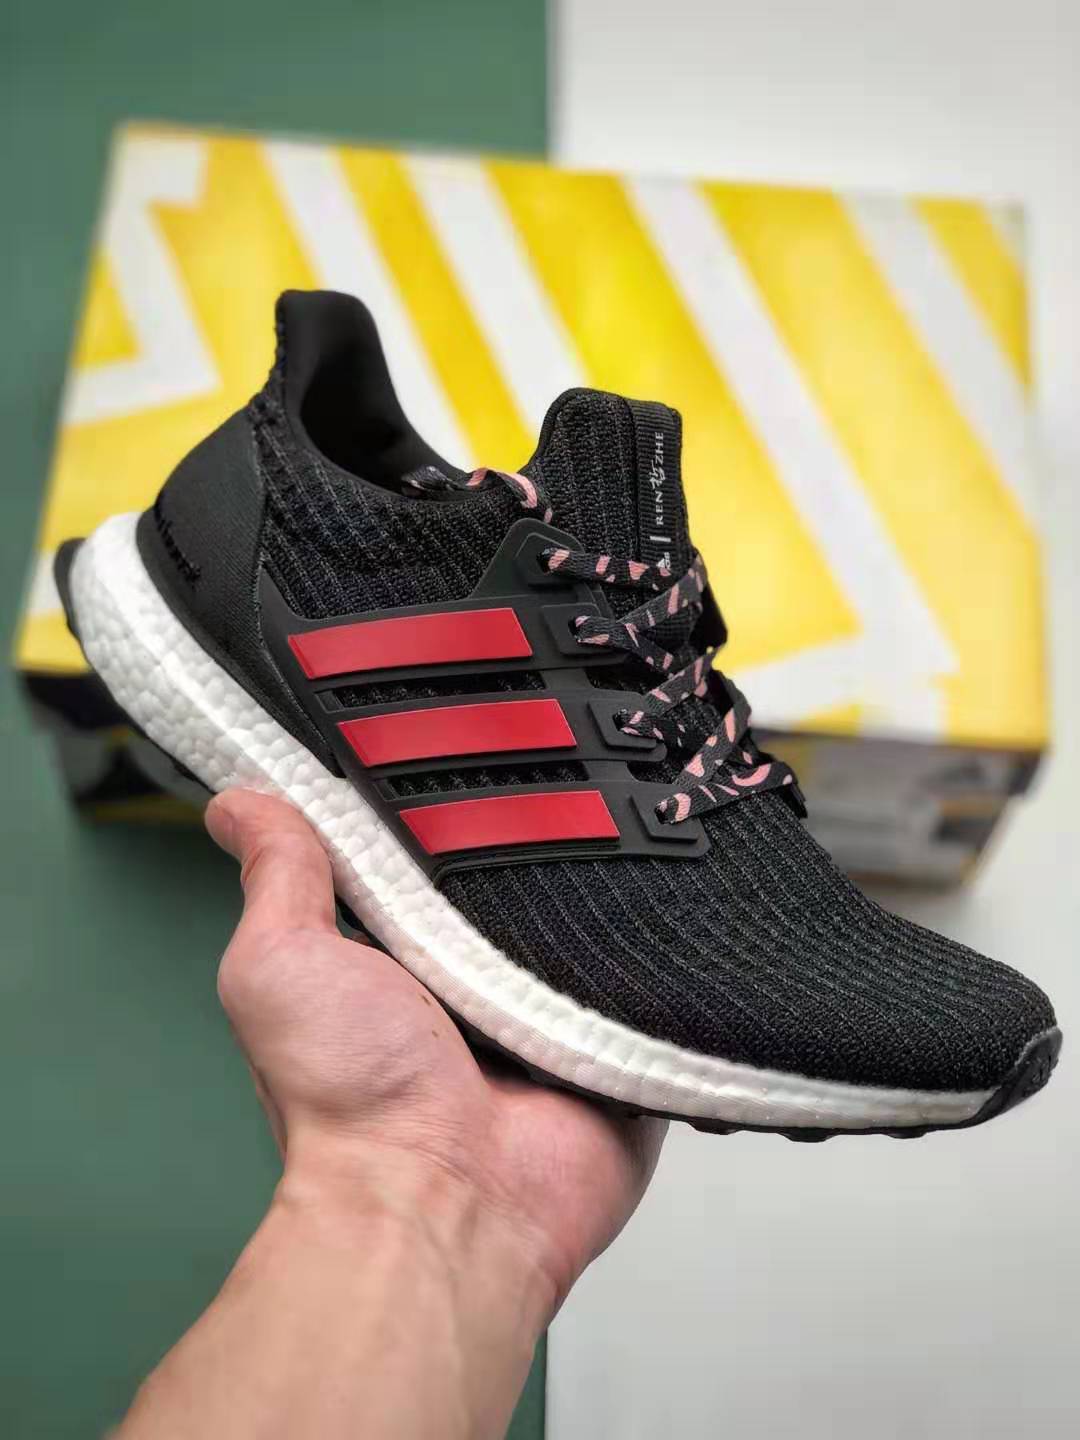 Adidas Ren Zhe x UltraBoost 4.0 'Chinese New Year' | Limited Edition